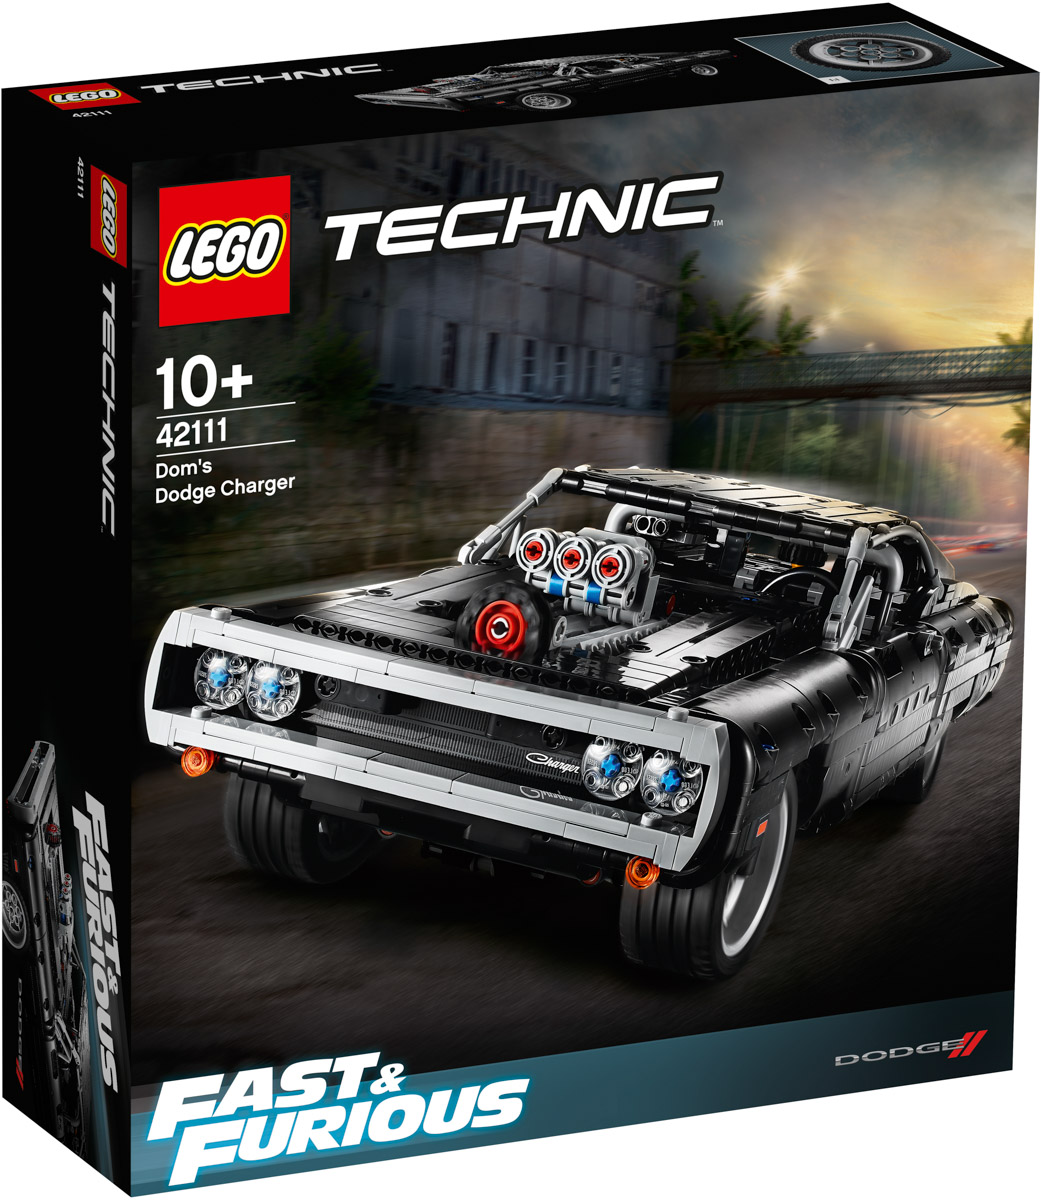 LEGO Technic 42111 Dom's Dodge Charger (Fast & Furious), l'annonce  officielle - HelloBricks